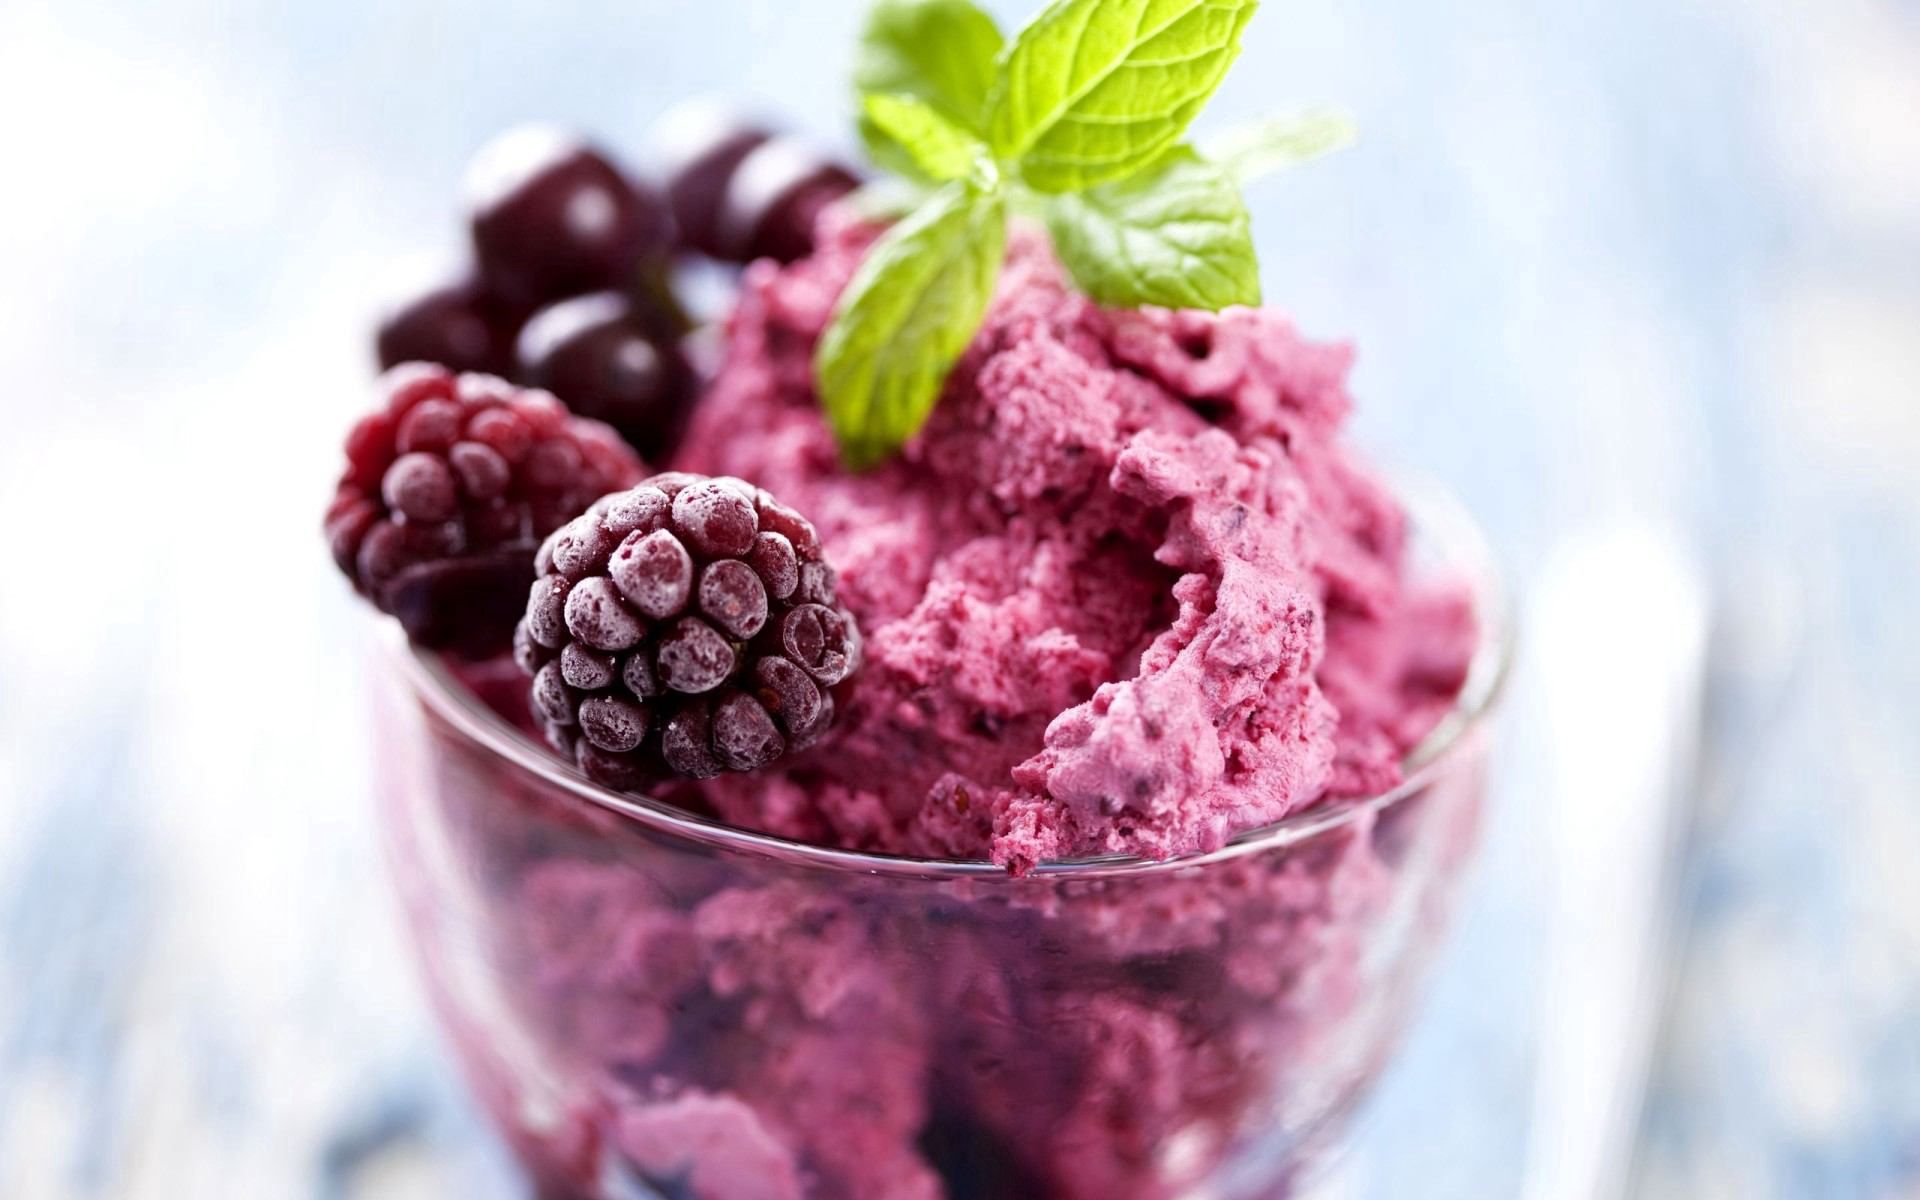 148022 download wallpaper desert, food, ice cream, blackberry, berry screensavers and pictures for free